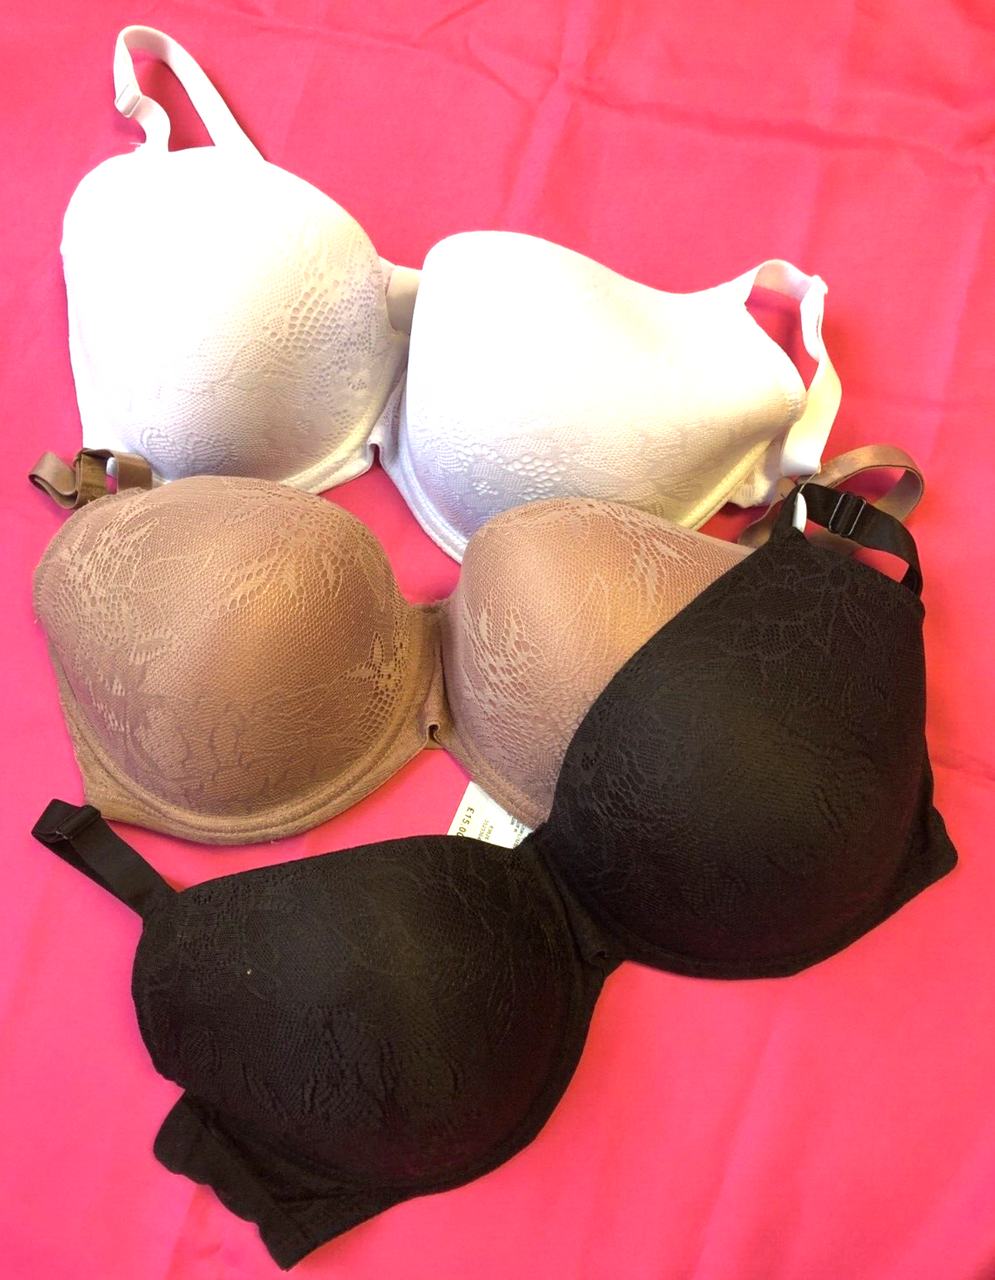 Primark Bras 34E PK3 Black/White/Nude Padded Balcony Underwired New with  Tags - Against Breast Cancer